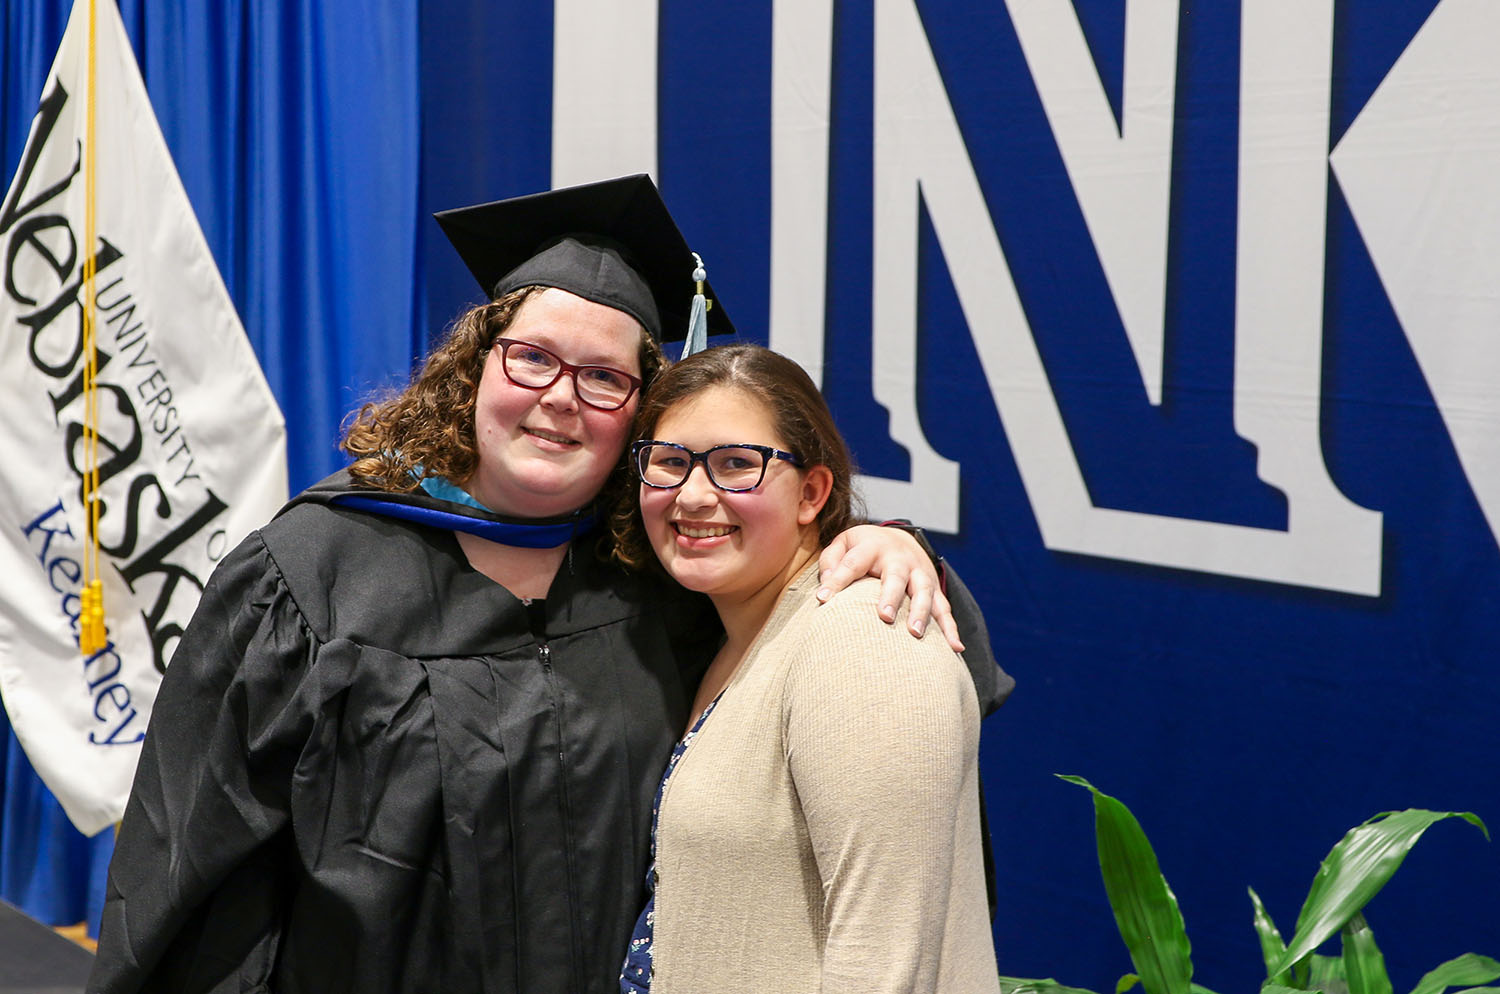 Alecia Amezcua of Madison, left, poses for a photo with her daughter Ariana following Thursday’s commencement ceremony at the University of Nebraska at Kearney. Amezcua graduated from UNK with a master’s degree in Spanish education. (Photos by Todd Gottula, UNK Communications)